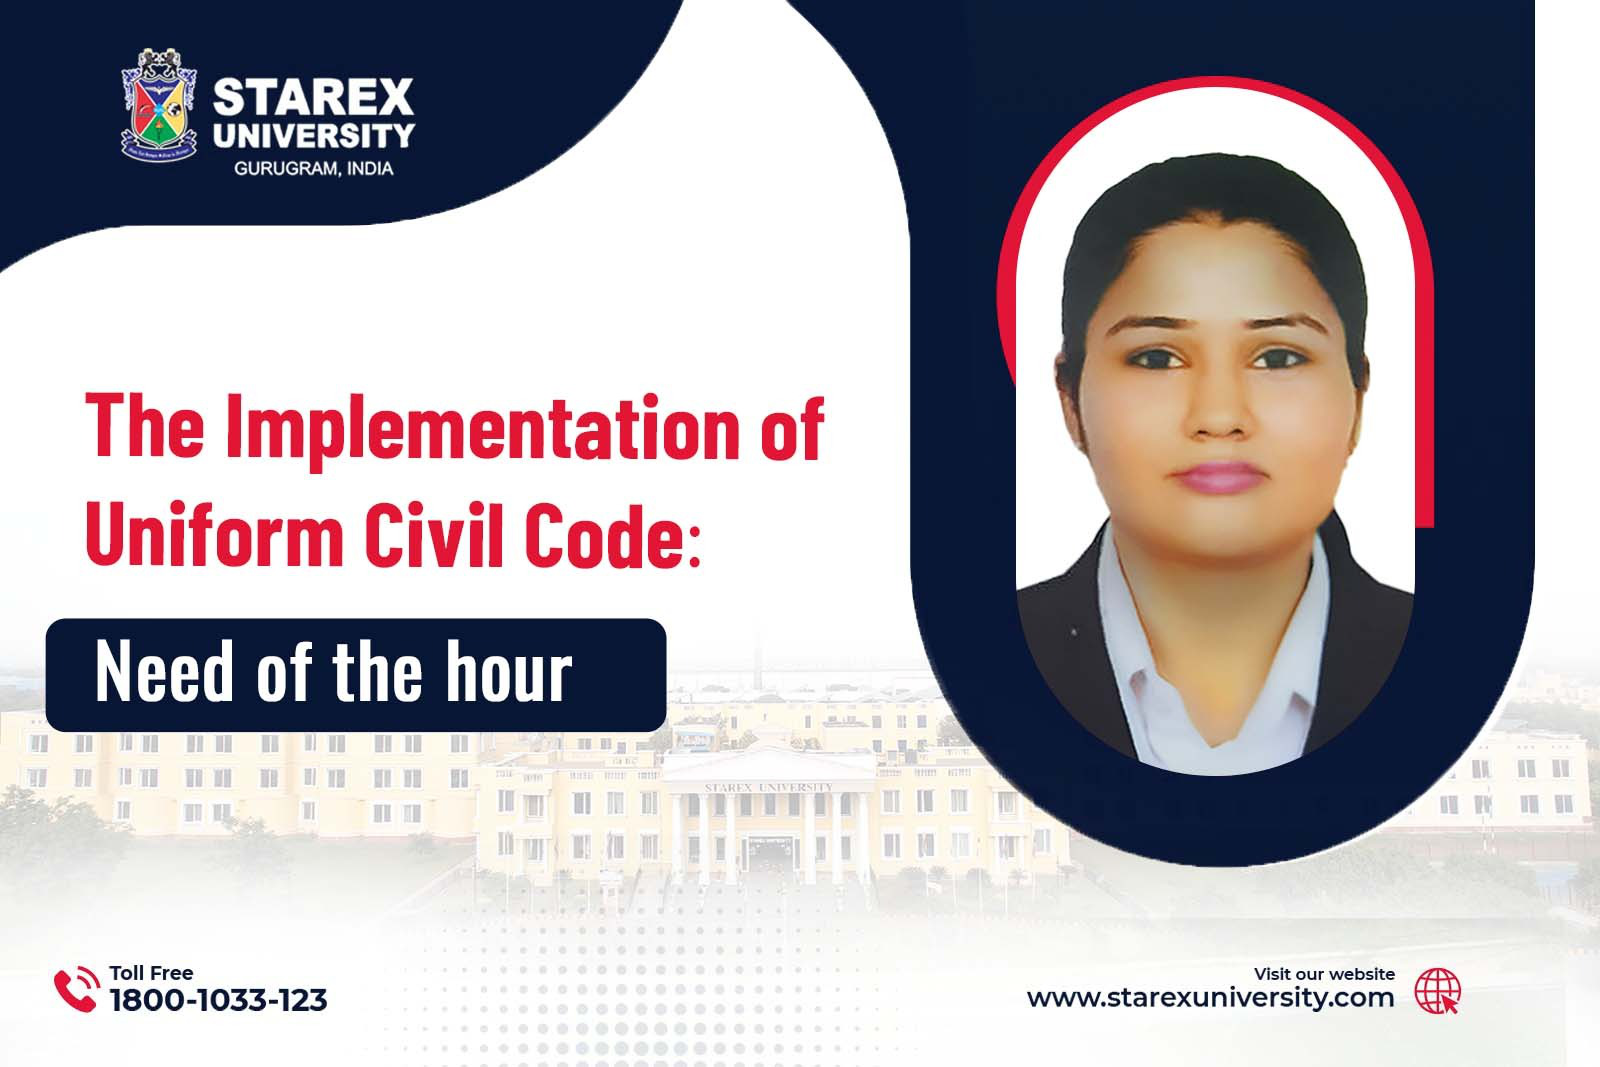 The Implementation of Uniform Civil Code: Need of the Hour